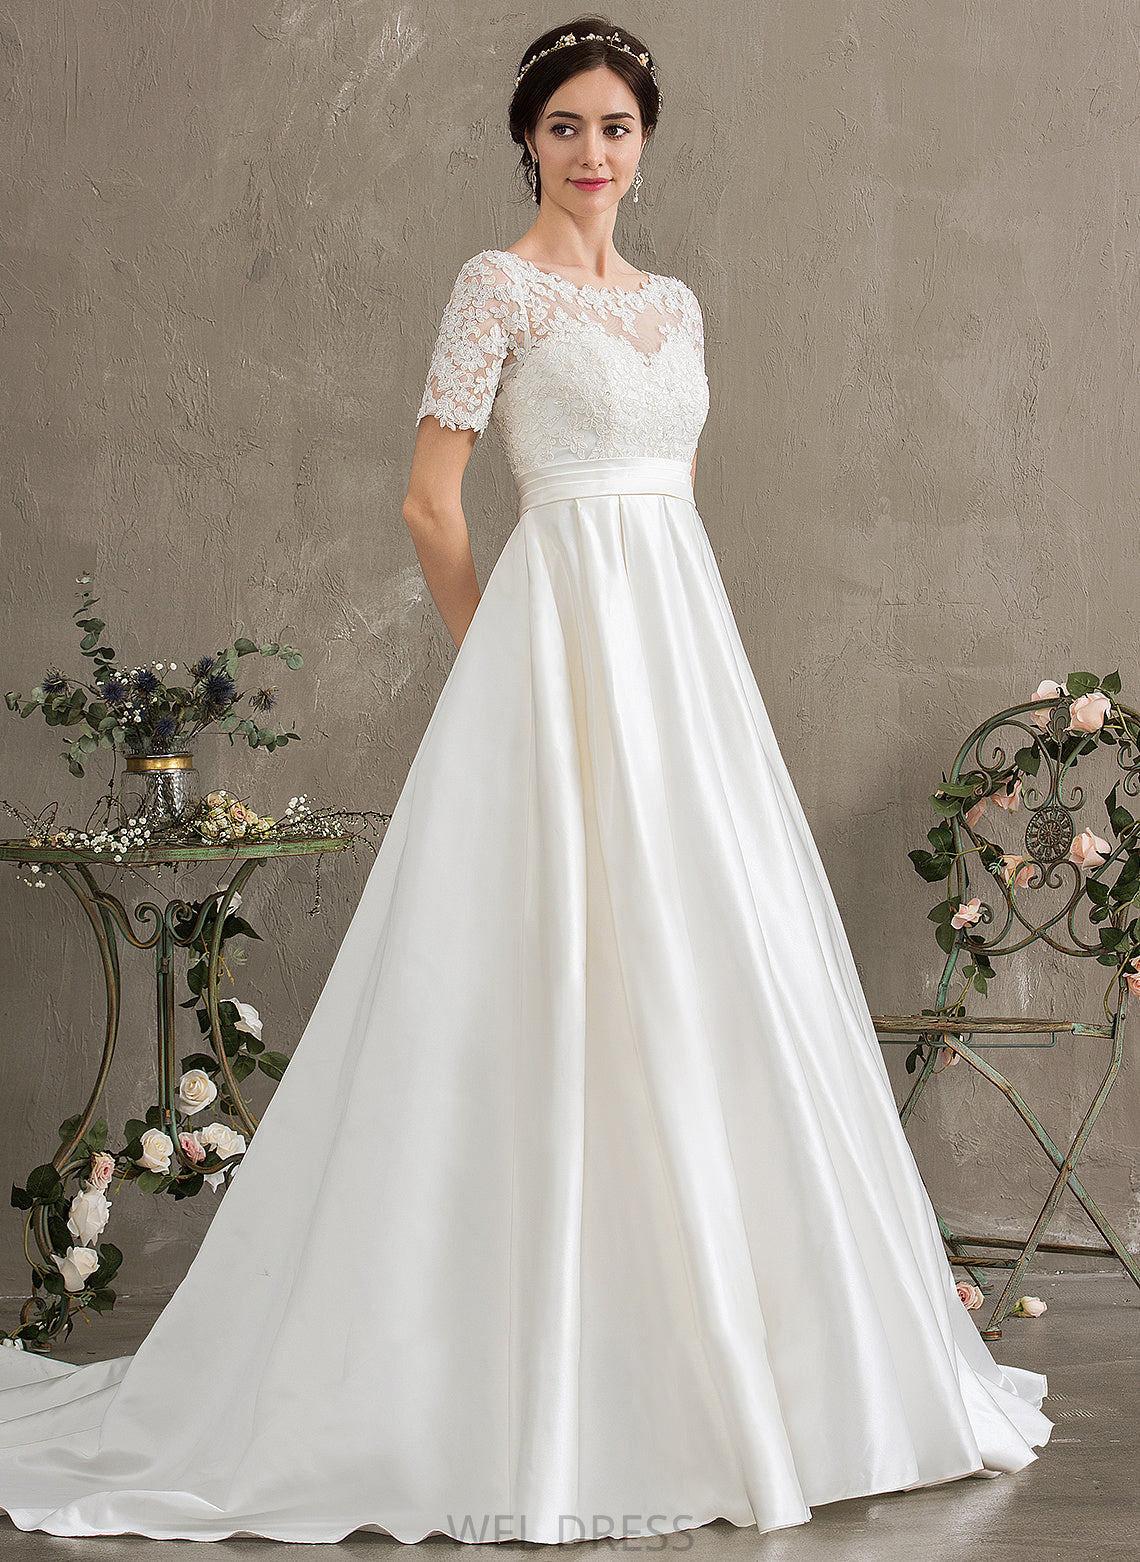 Scoop Dress Beading Court Wedding Train Pockets Ball-Gown/Princess Neck Wedding Dresses Jacey Sequins With Satin